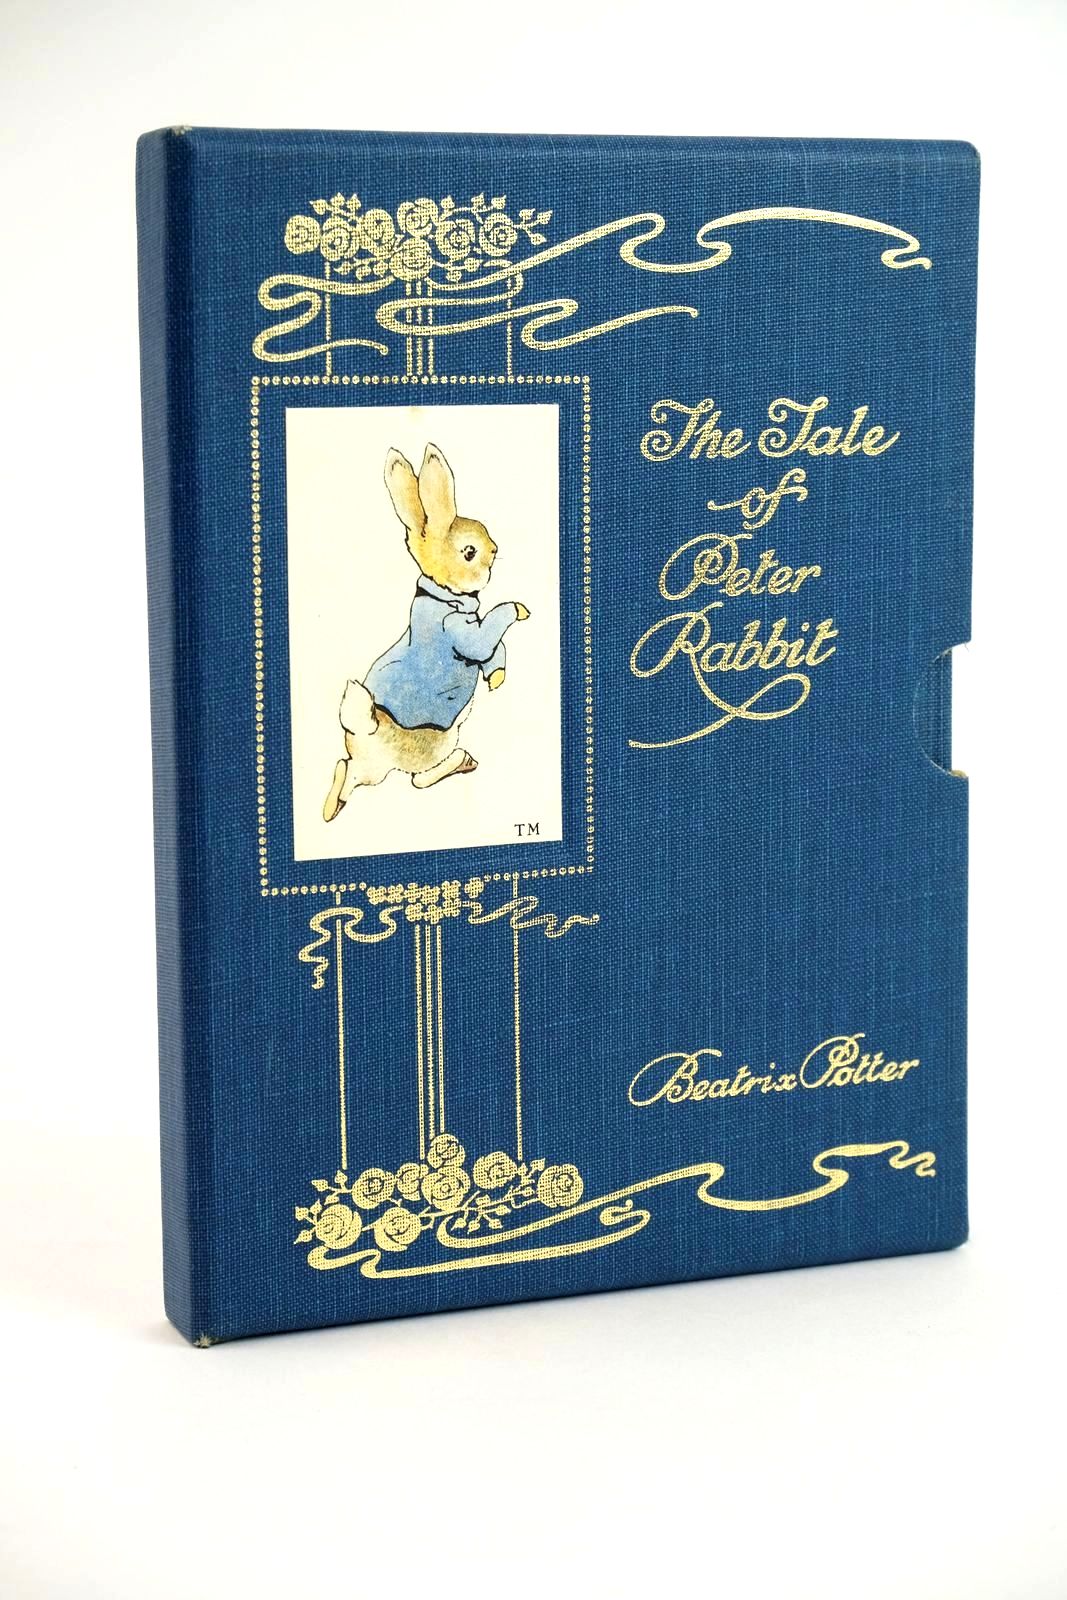 Photo of THE TALE OF PETER RABBIT written by Potter, Beatrix illustrated by Potter, Beatrix published by Frederick Warne (STOCK CODE: 1323361)  for sale by Stella & Rose's Books